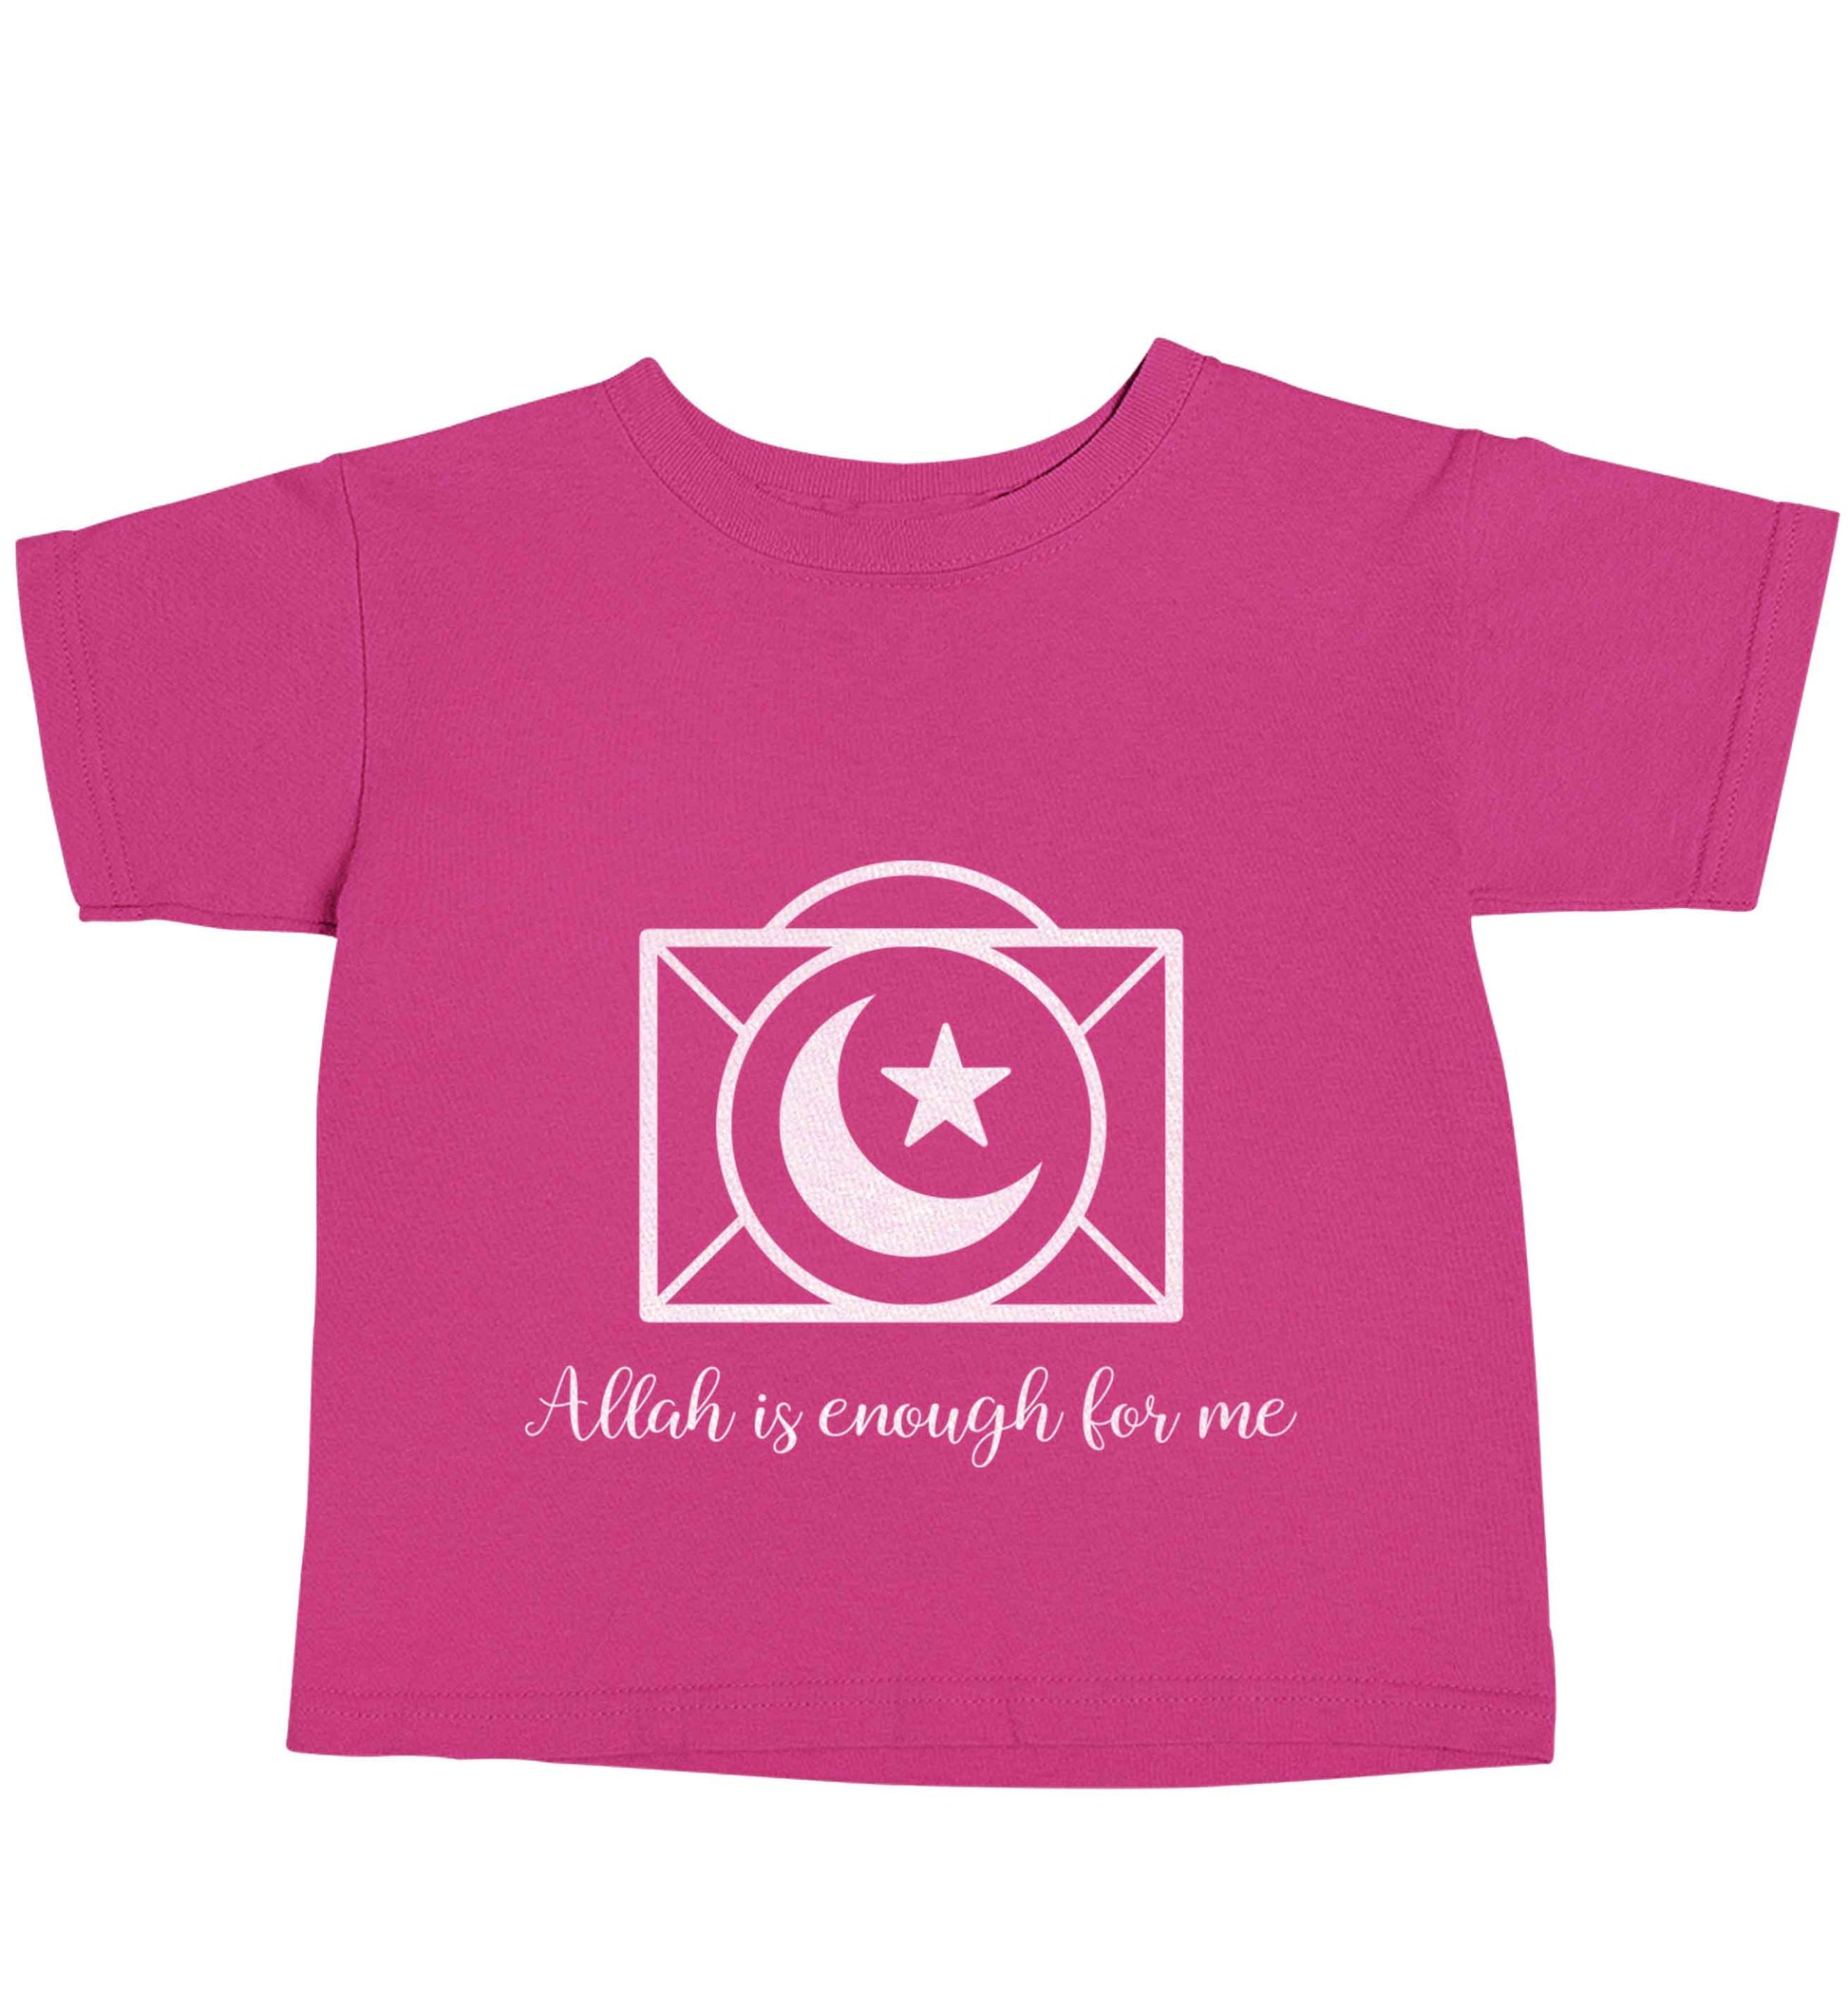 Allah is enough for me pink baby toddler Tshirt 2 Years